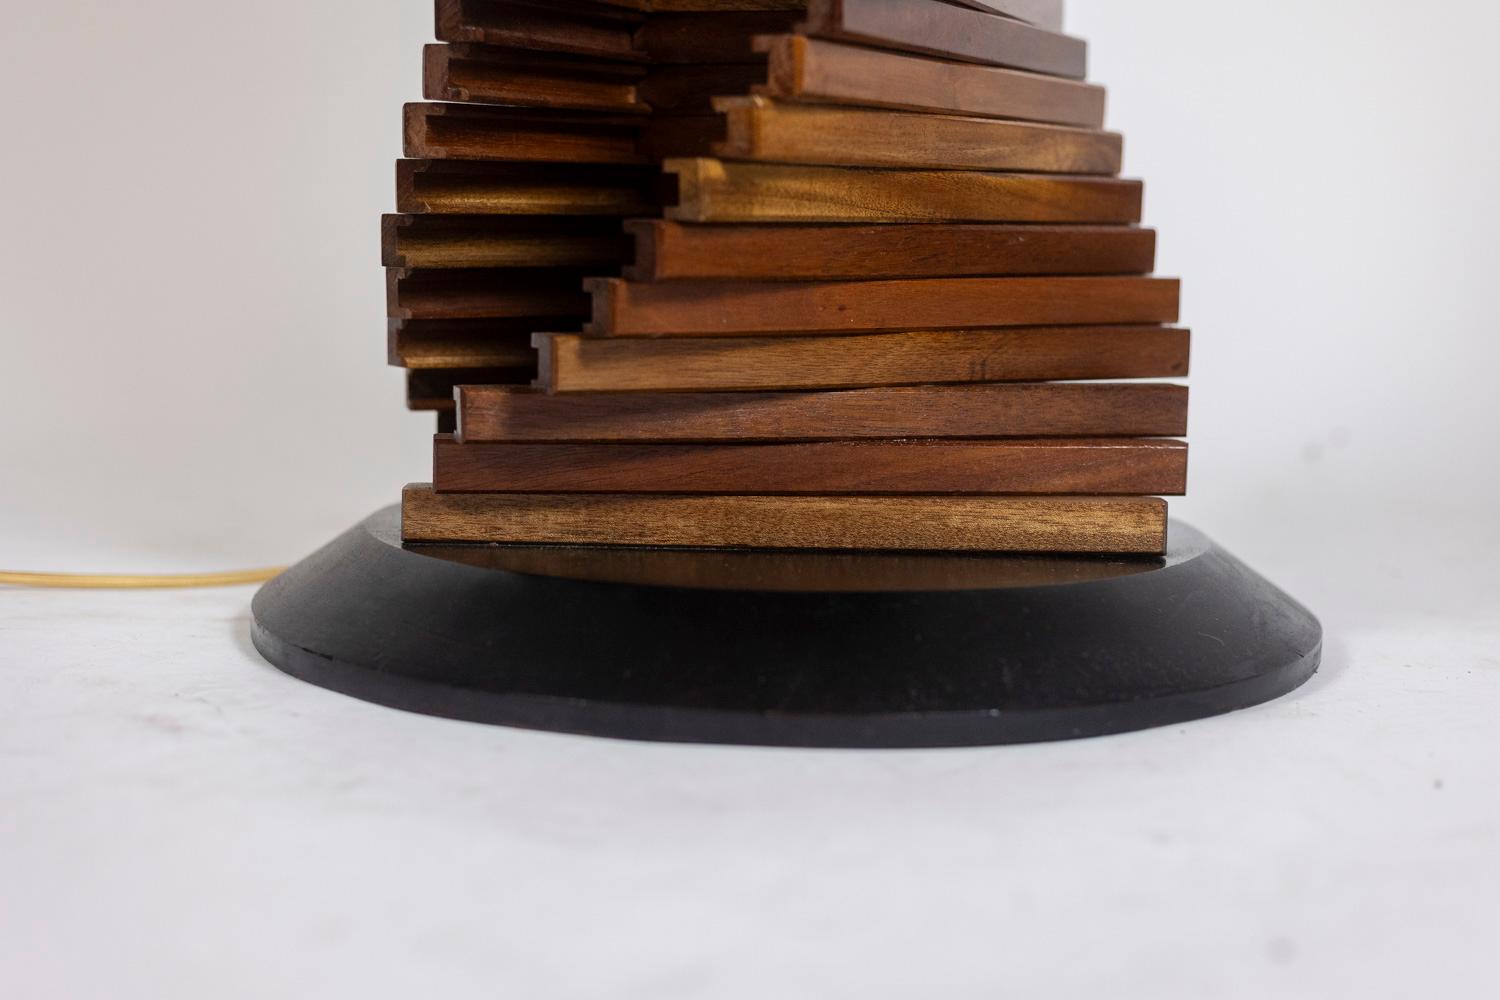 Varnished wooden lamp base, sculptural and abstract in shape, ending in a decorative ball at the top. Circular base in black lacquered wood.

French work realized in the 1980s.